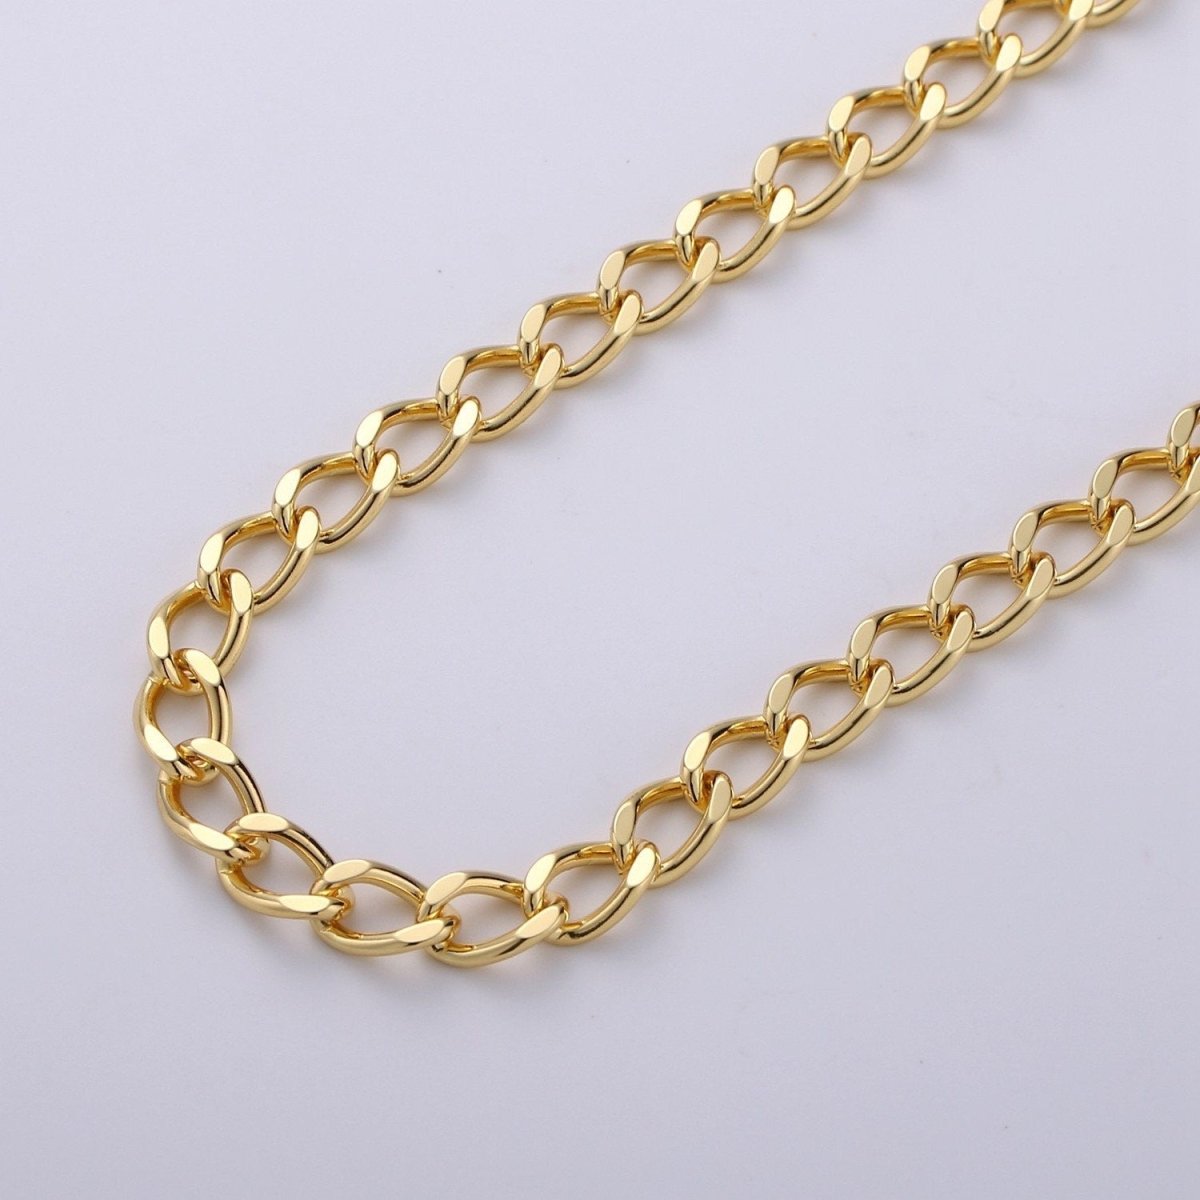 Chunky Thick 24K Gold Filled Curb Chain By Yard, 8X5mm Unfinished Gold Chain For Bracelet Necklace Anklet Jewelry Making Supply | ROLL-236 Clearance Pricing - DLUXCA